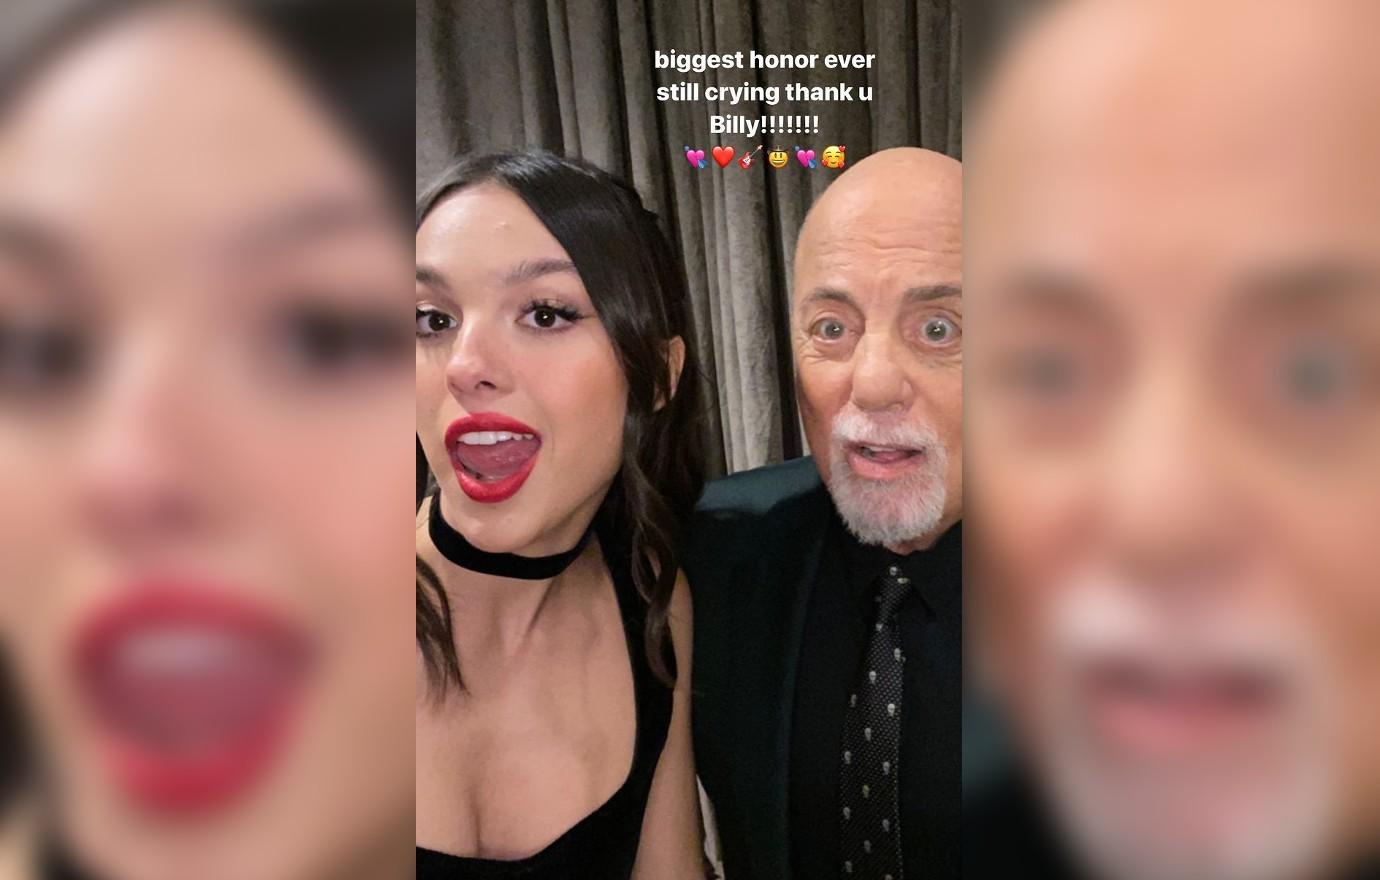 Olivia Rodrigo's SOUR Merchandise Is Being Roasted By Fans